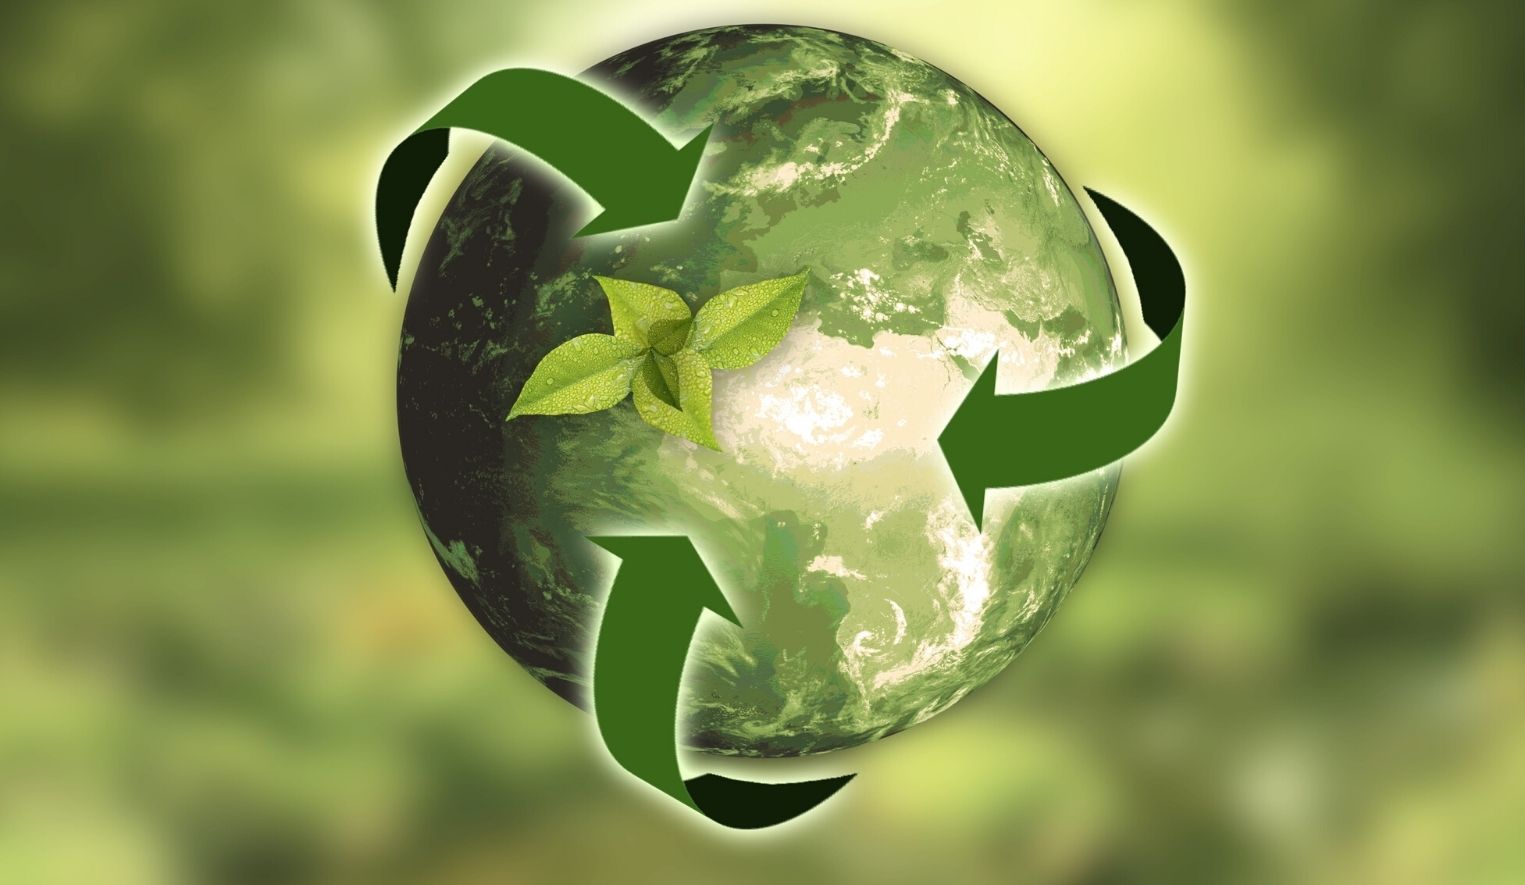 Green Earth - Reuse, Recycle & Reduce